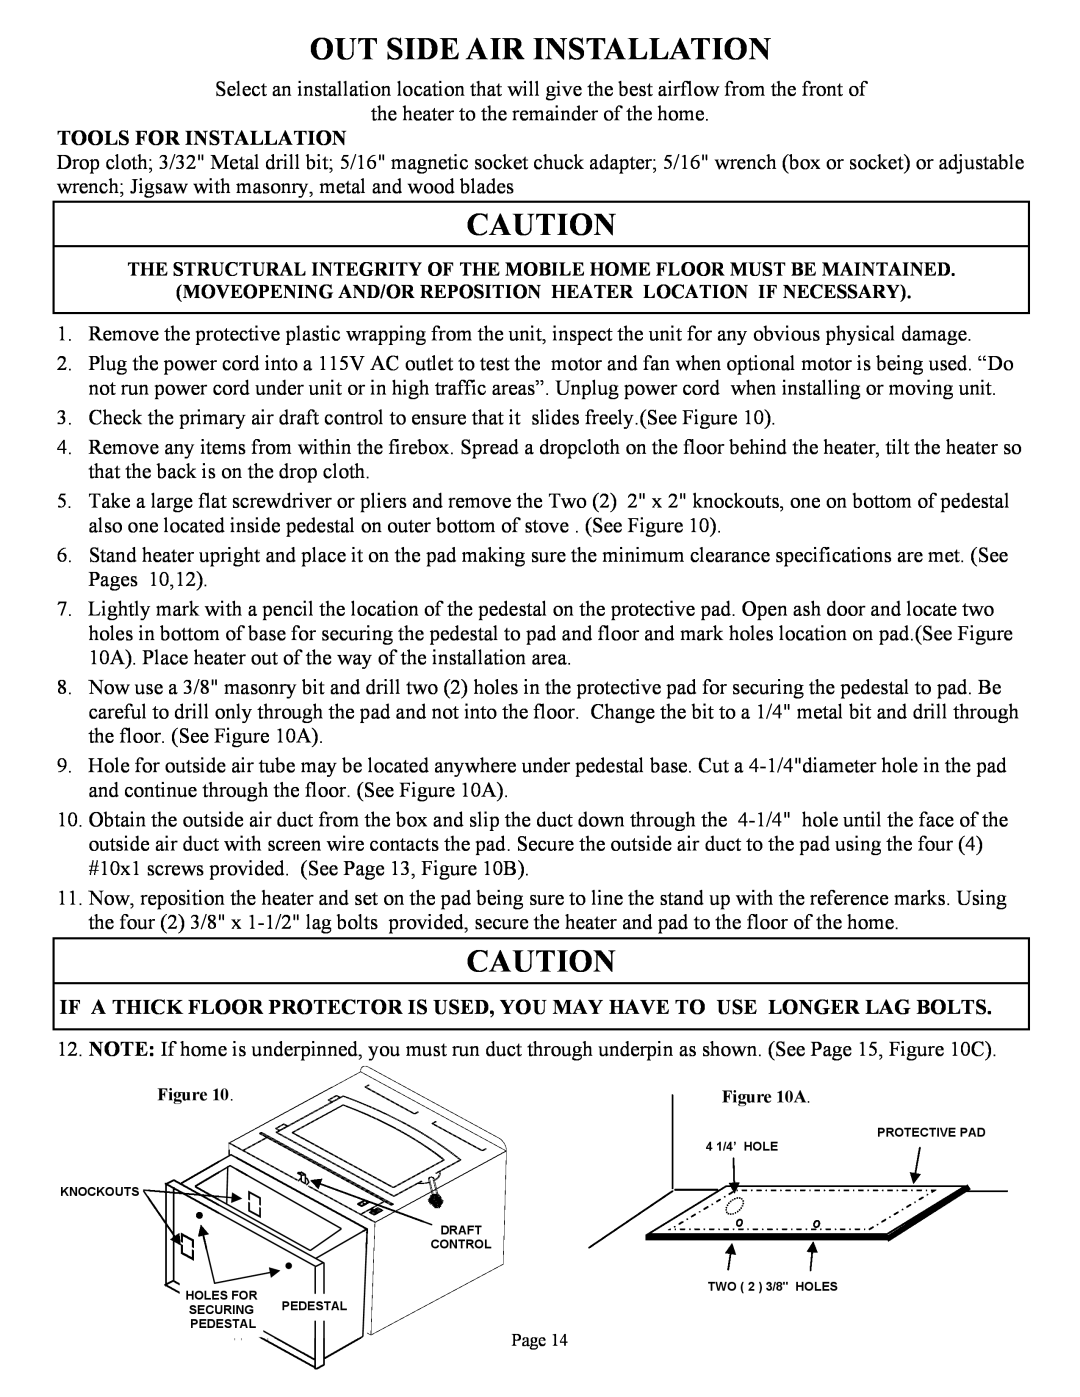 New Buck Corporation FS 21 installation instructions Out Side Air Installation, Tools For Installation 